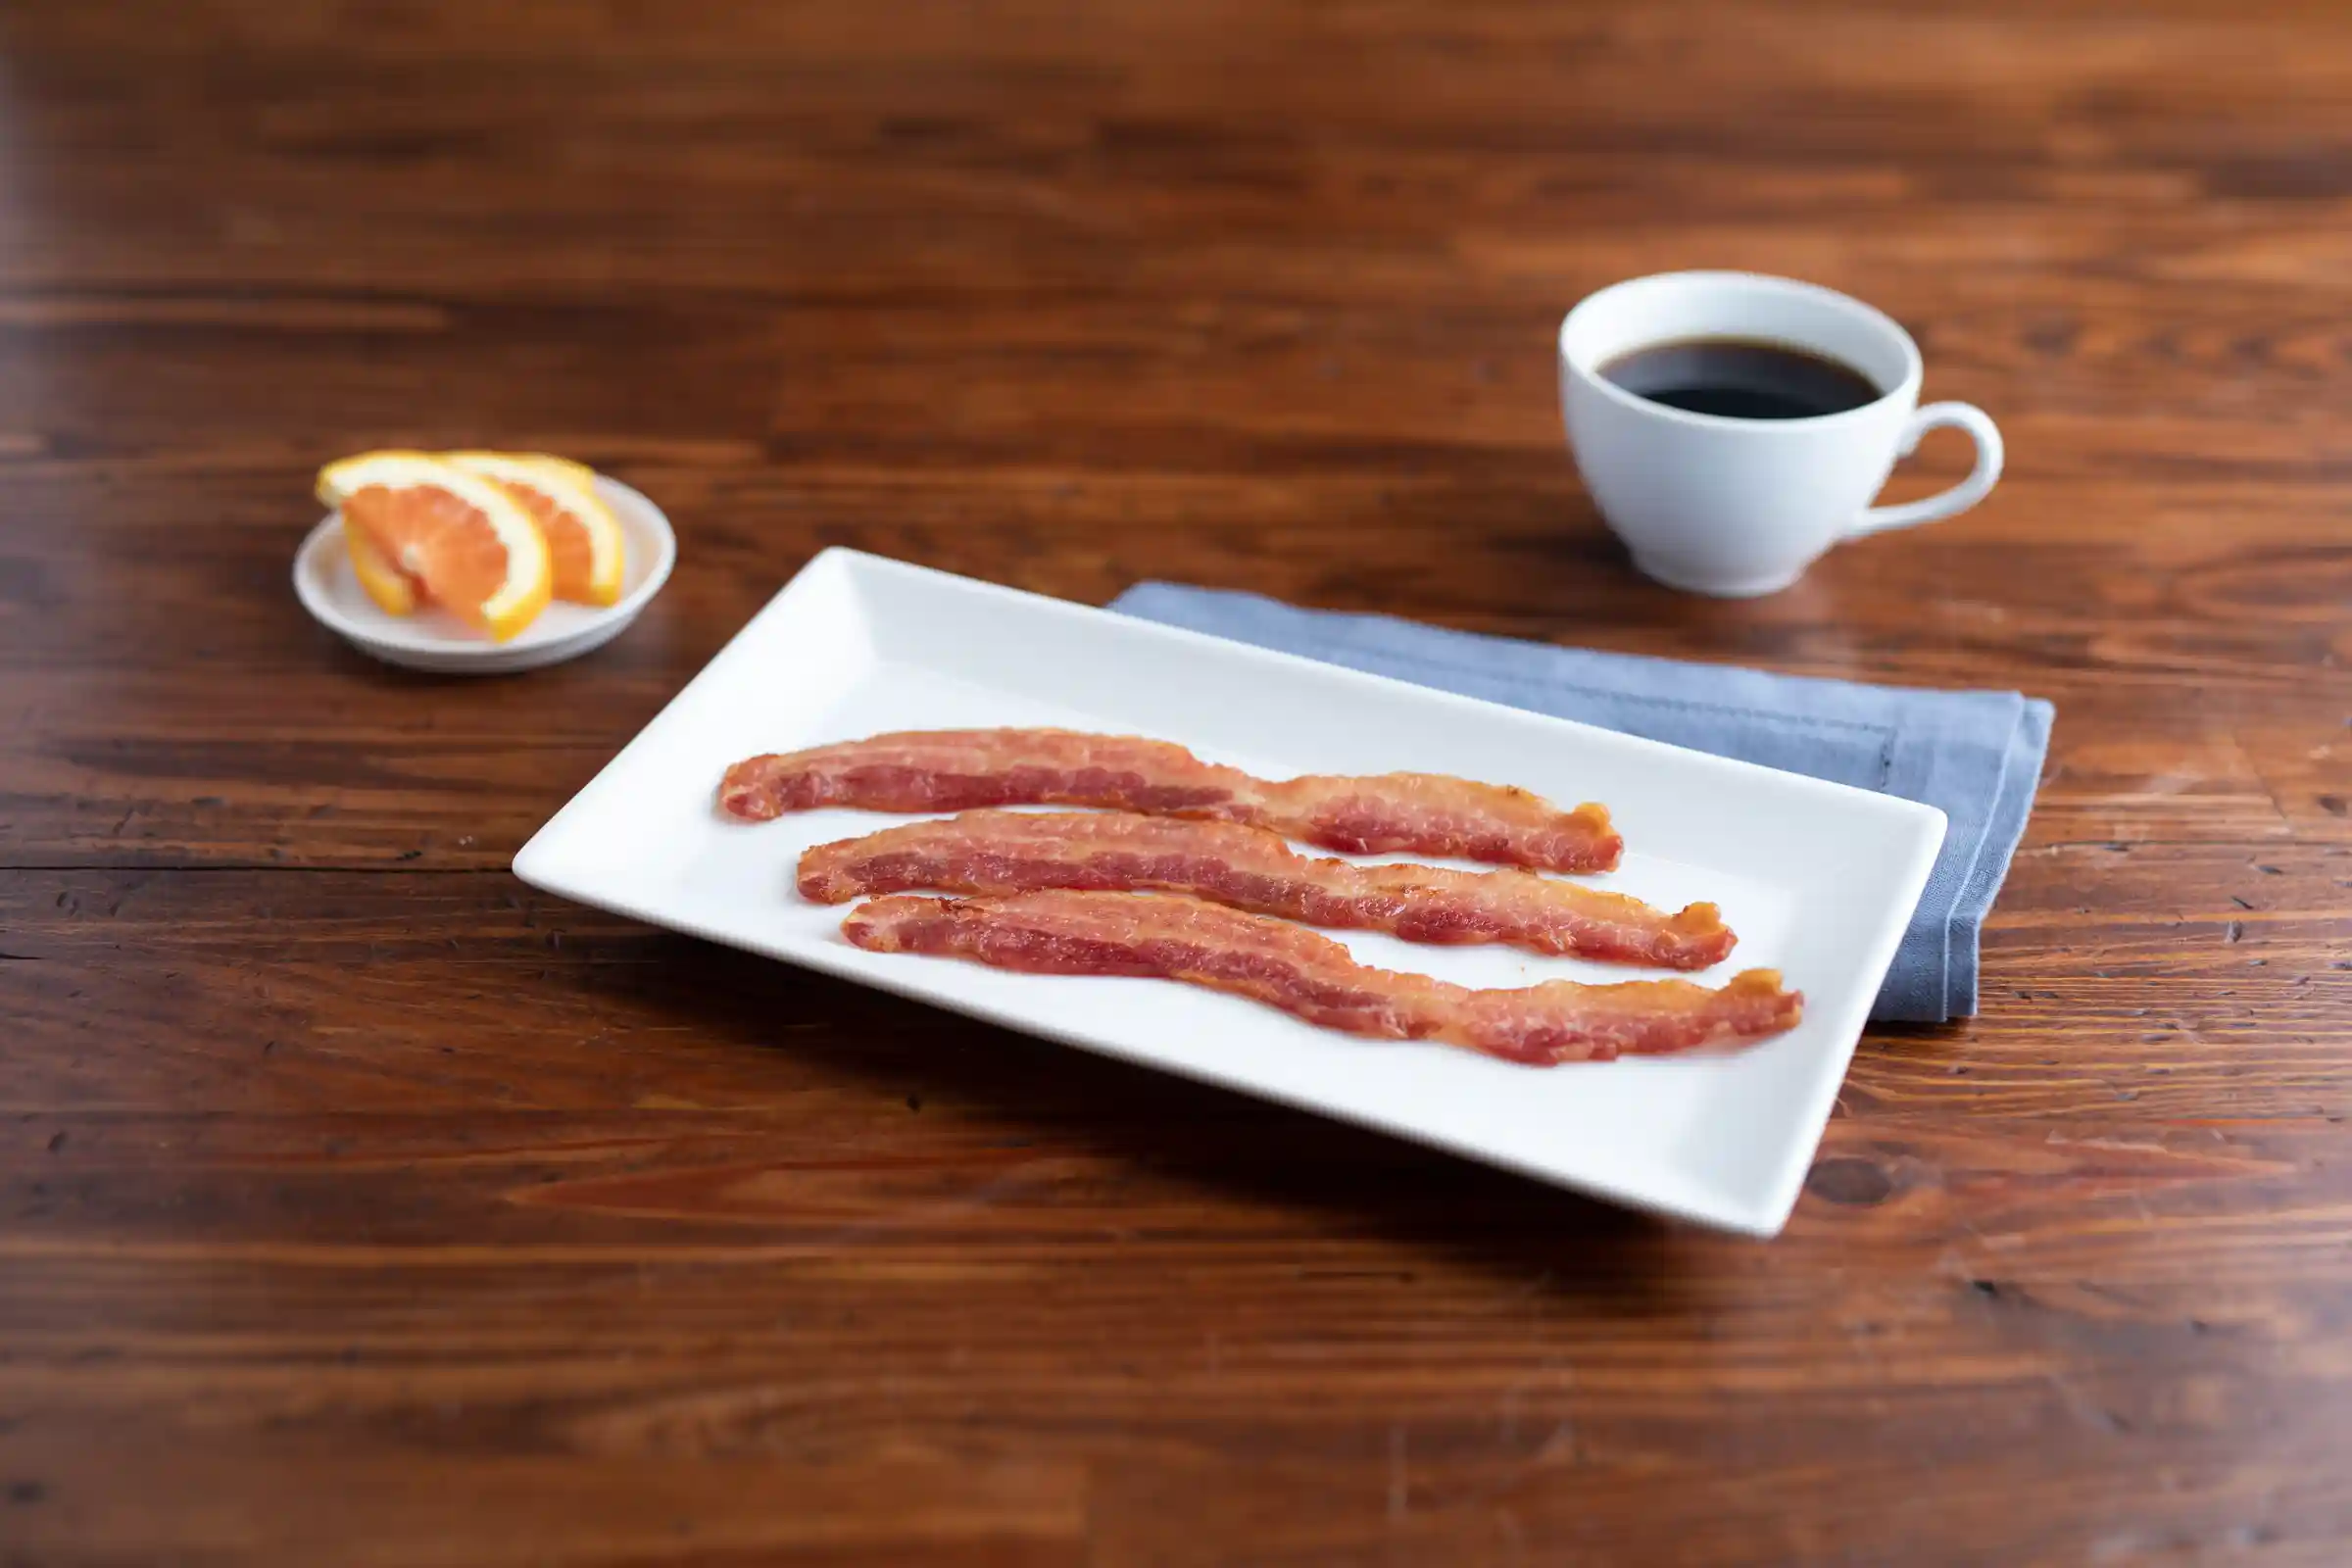 Wright® Brand Naturally Smoked Regular Sliced Bacon, Bulk, 30 Lbs, 14-18 Slices per Pound, Gas Flushed_image_01